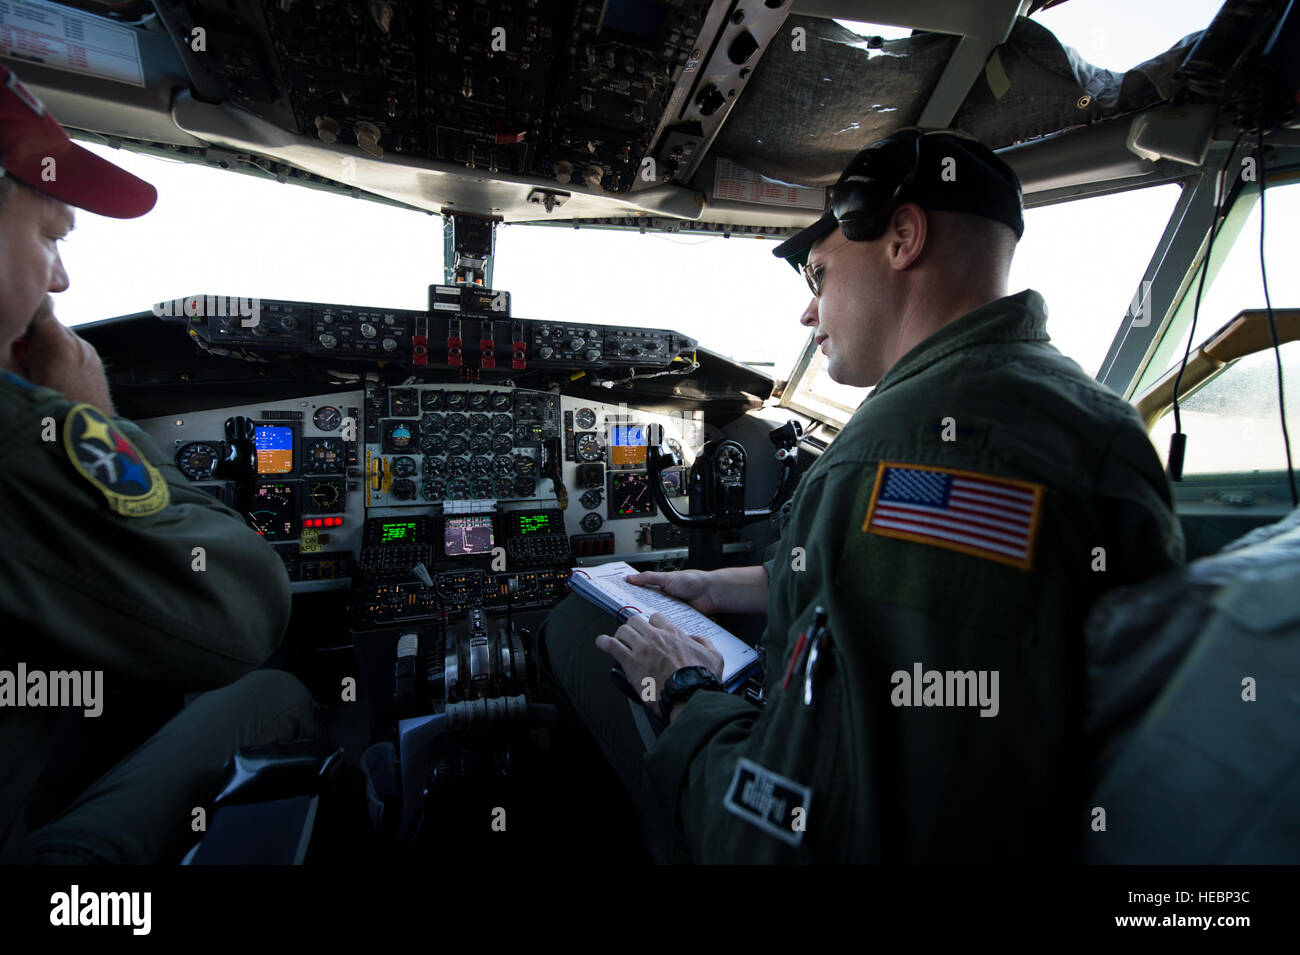 Pennsylvania Air National Guard Airmen Lt. Col. Chuck Tubbs, aircraft commander, left, and 1st. Lt Brandon Rader, right, both of the 171st Air Refueling Wing, accomplish their pre-flight checklist prior to launch of a KC-135 Stratotanker from the Combat Readiness Training Center (CRTC) flight line in Gulfport, Miss., during Exercise Southern Strike 15 (SS15), Oct. 28, 2014. SS15 is a total force, multiservice training exercise hosted by the Mississippi National Guard's CRTC from Oct. 27 through Nov. 7, 2014. The SS15 exercise emphasizes air-to-air, air-to-ground and special operations forces t Stock Photo